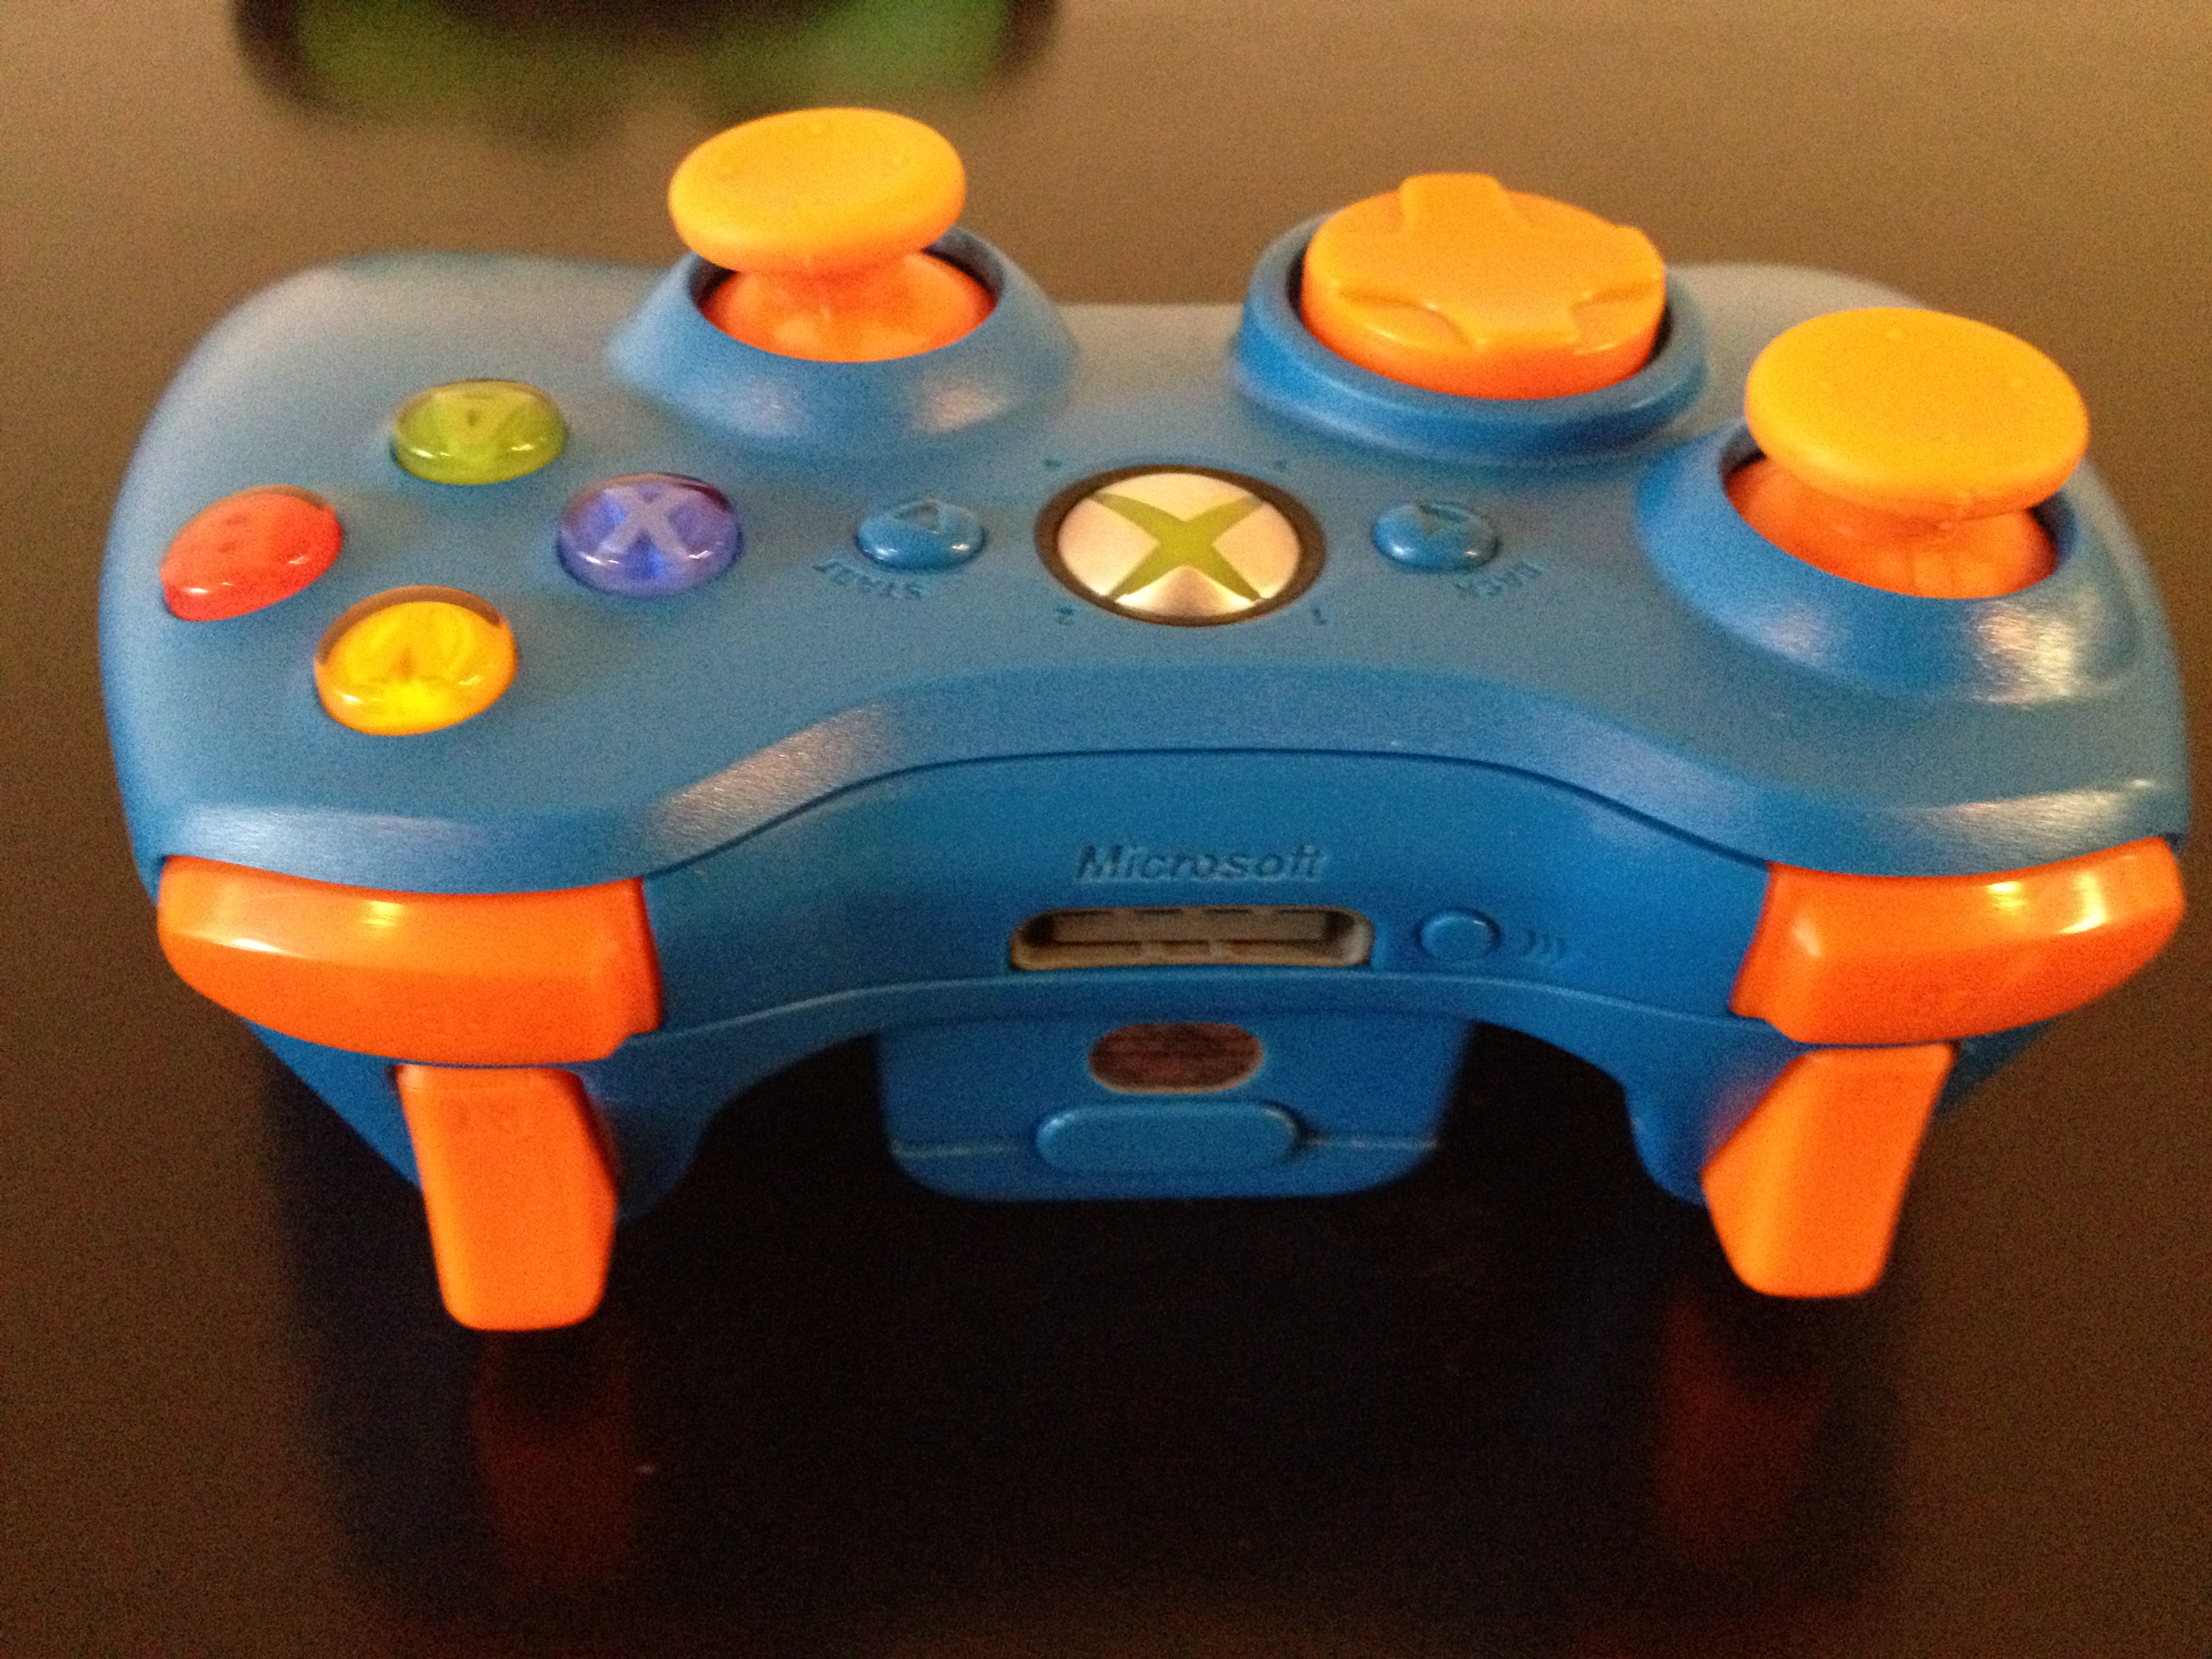 baby toy game controller